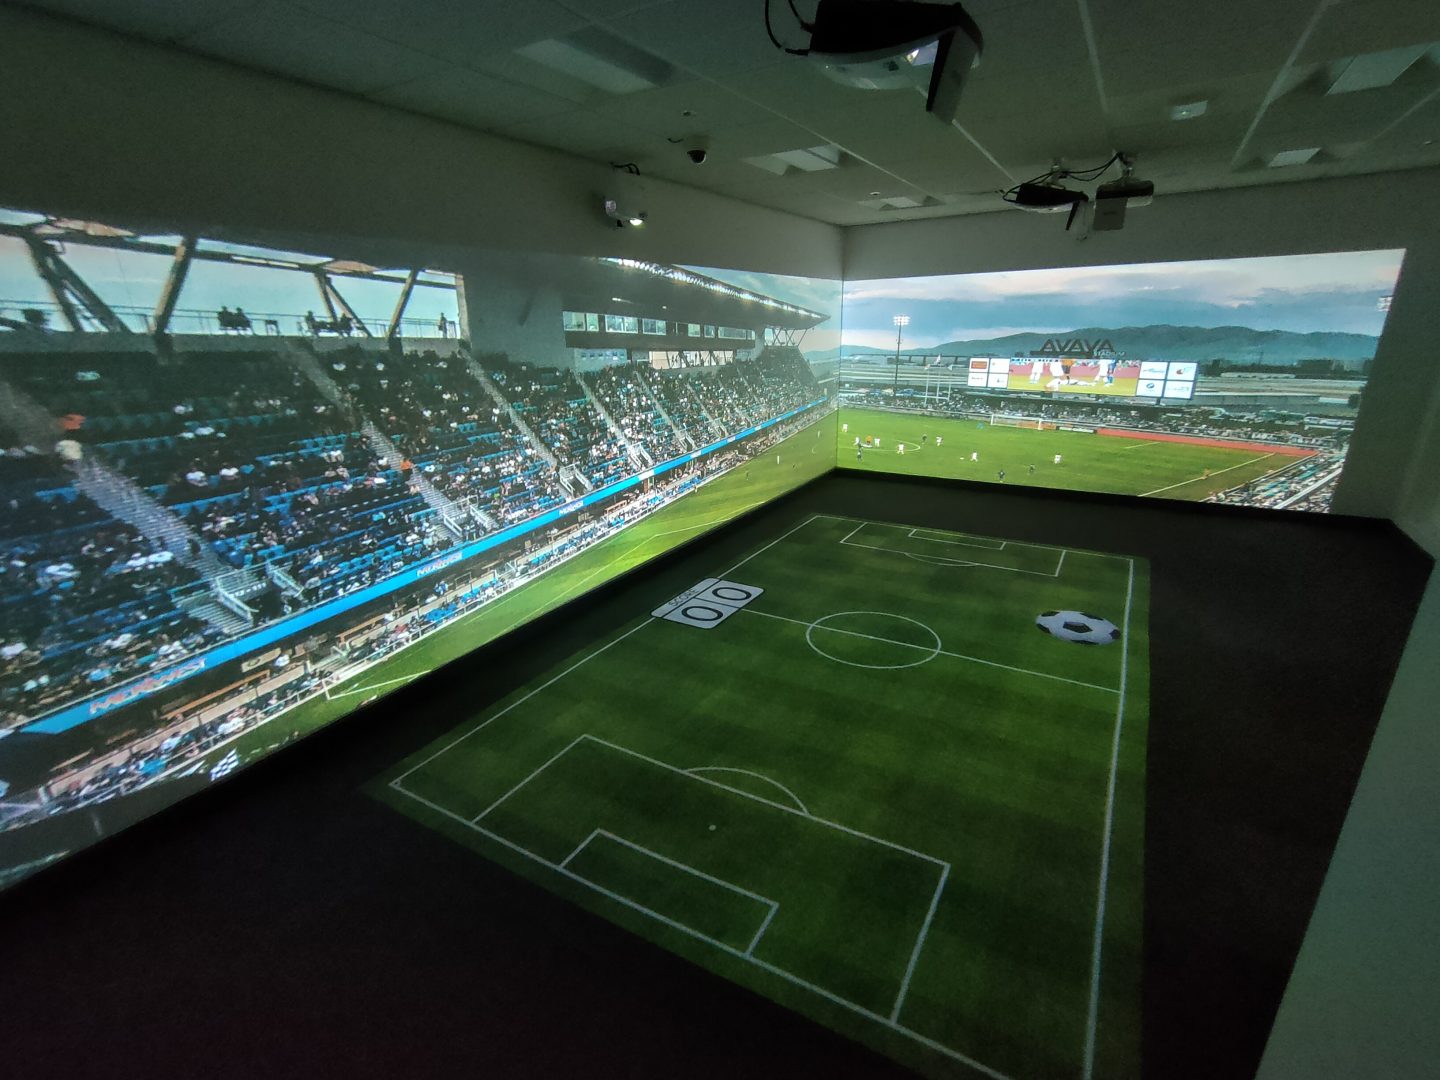 Immersive environment installed within a school. Interactive football on the floor and a non interactive football stadium is projected onto the walls